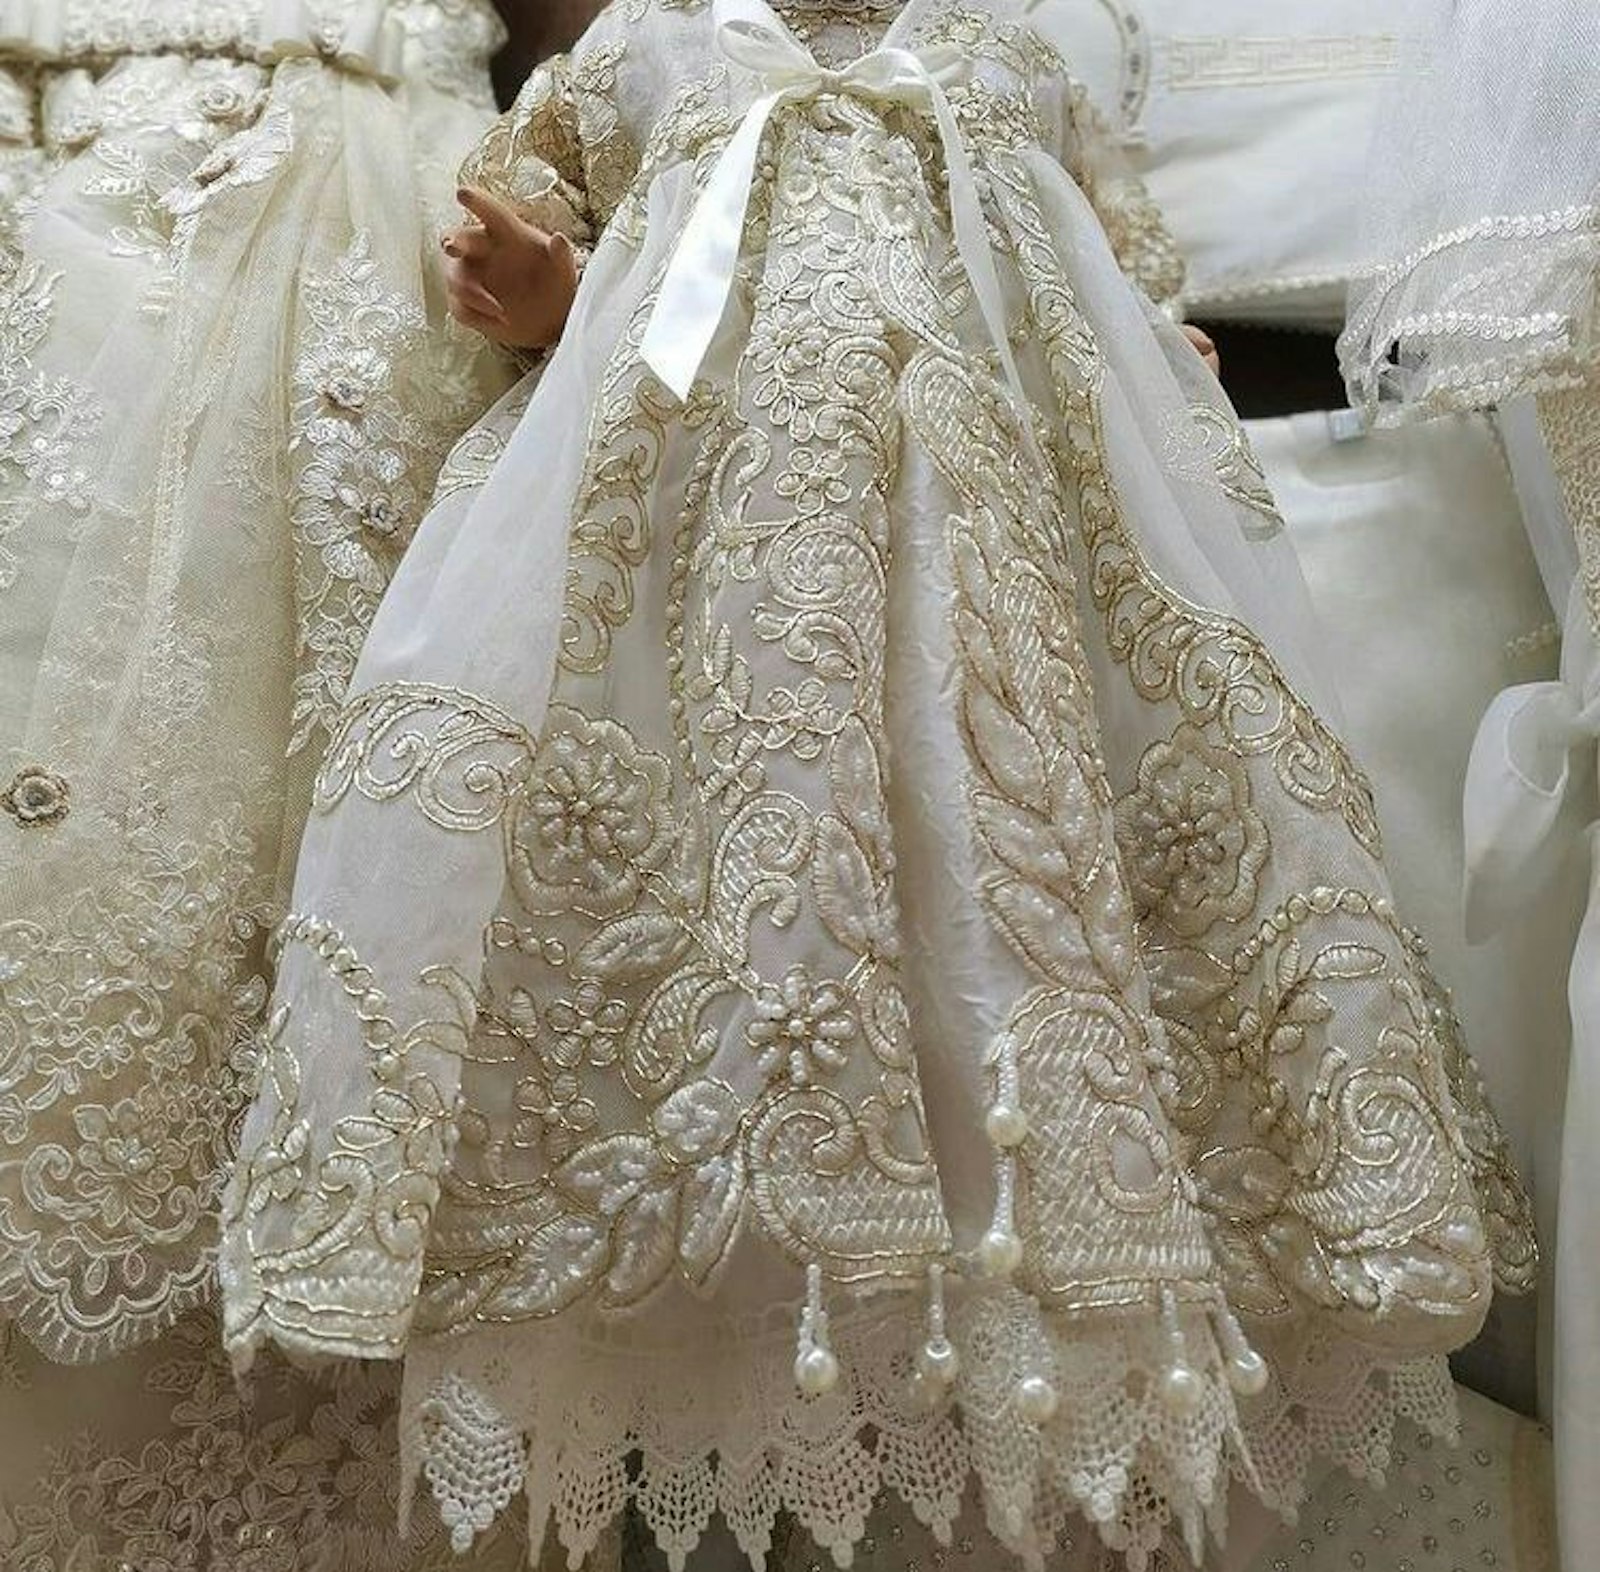 The creation of elaborate gowns to dress a baby Jesus is a Mexican tradition that is difficult to find in the United States.